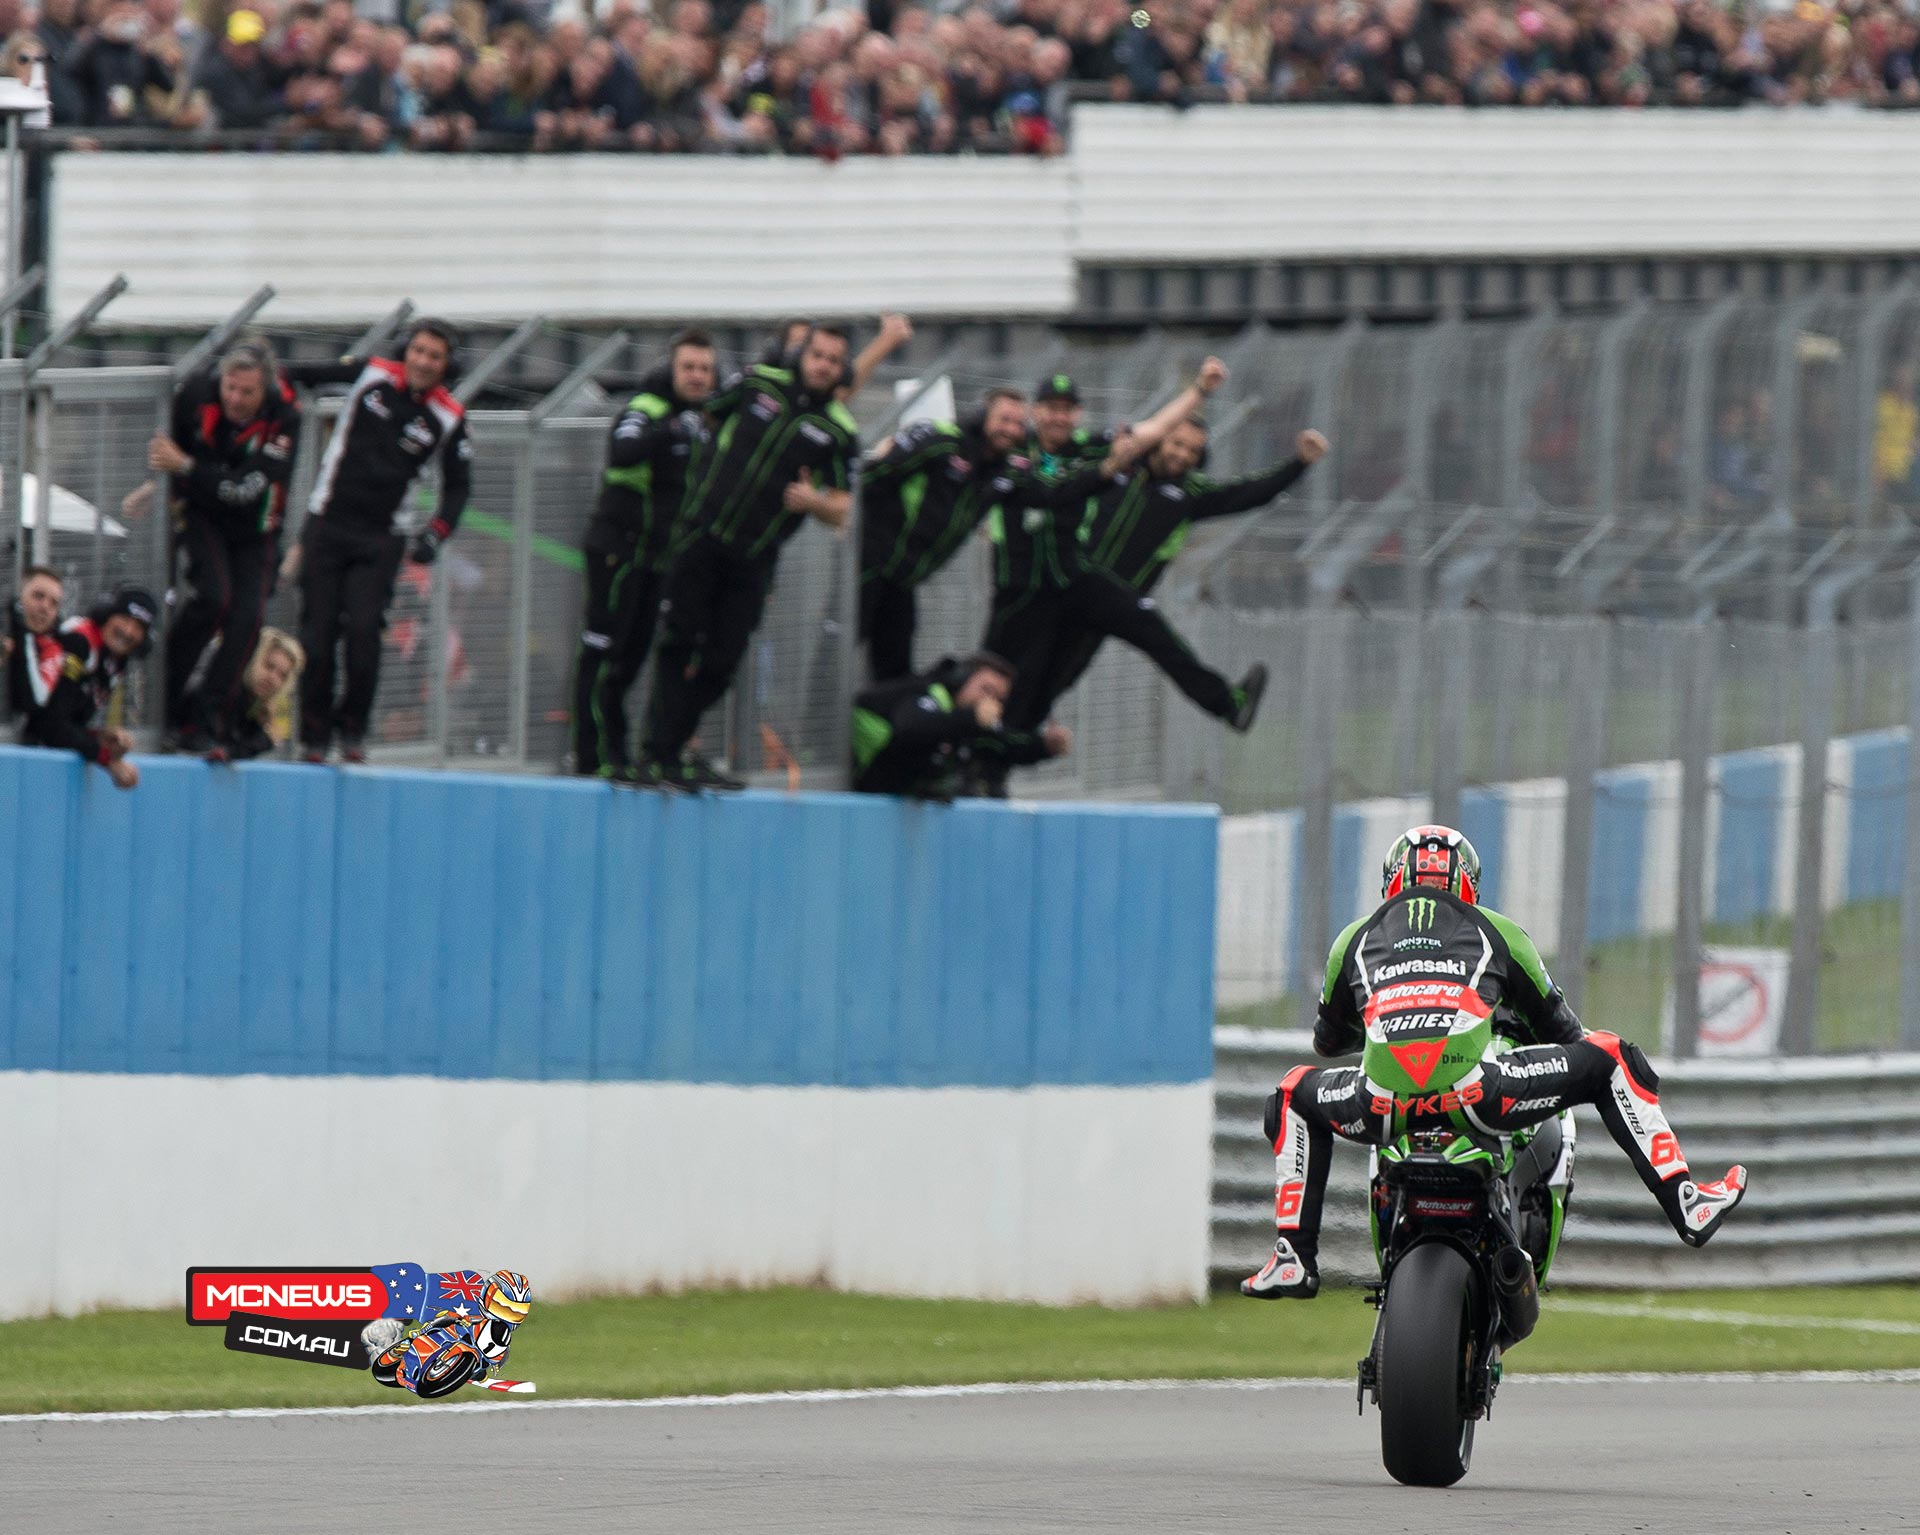 Kawasaki’s Tom Sykes invigorates his 2015 season by taking the Donington double and equalling the great Carl Fogarty’s record of six wins at the English circuit